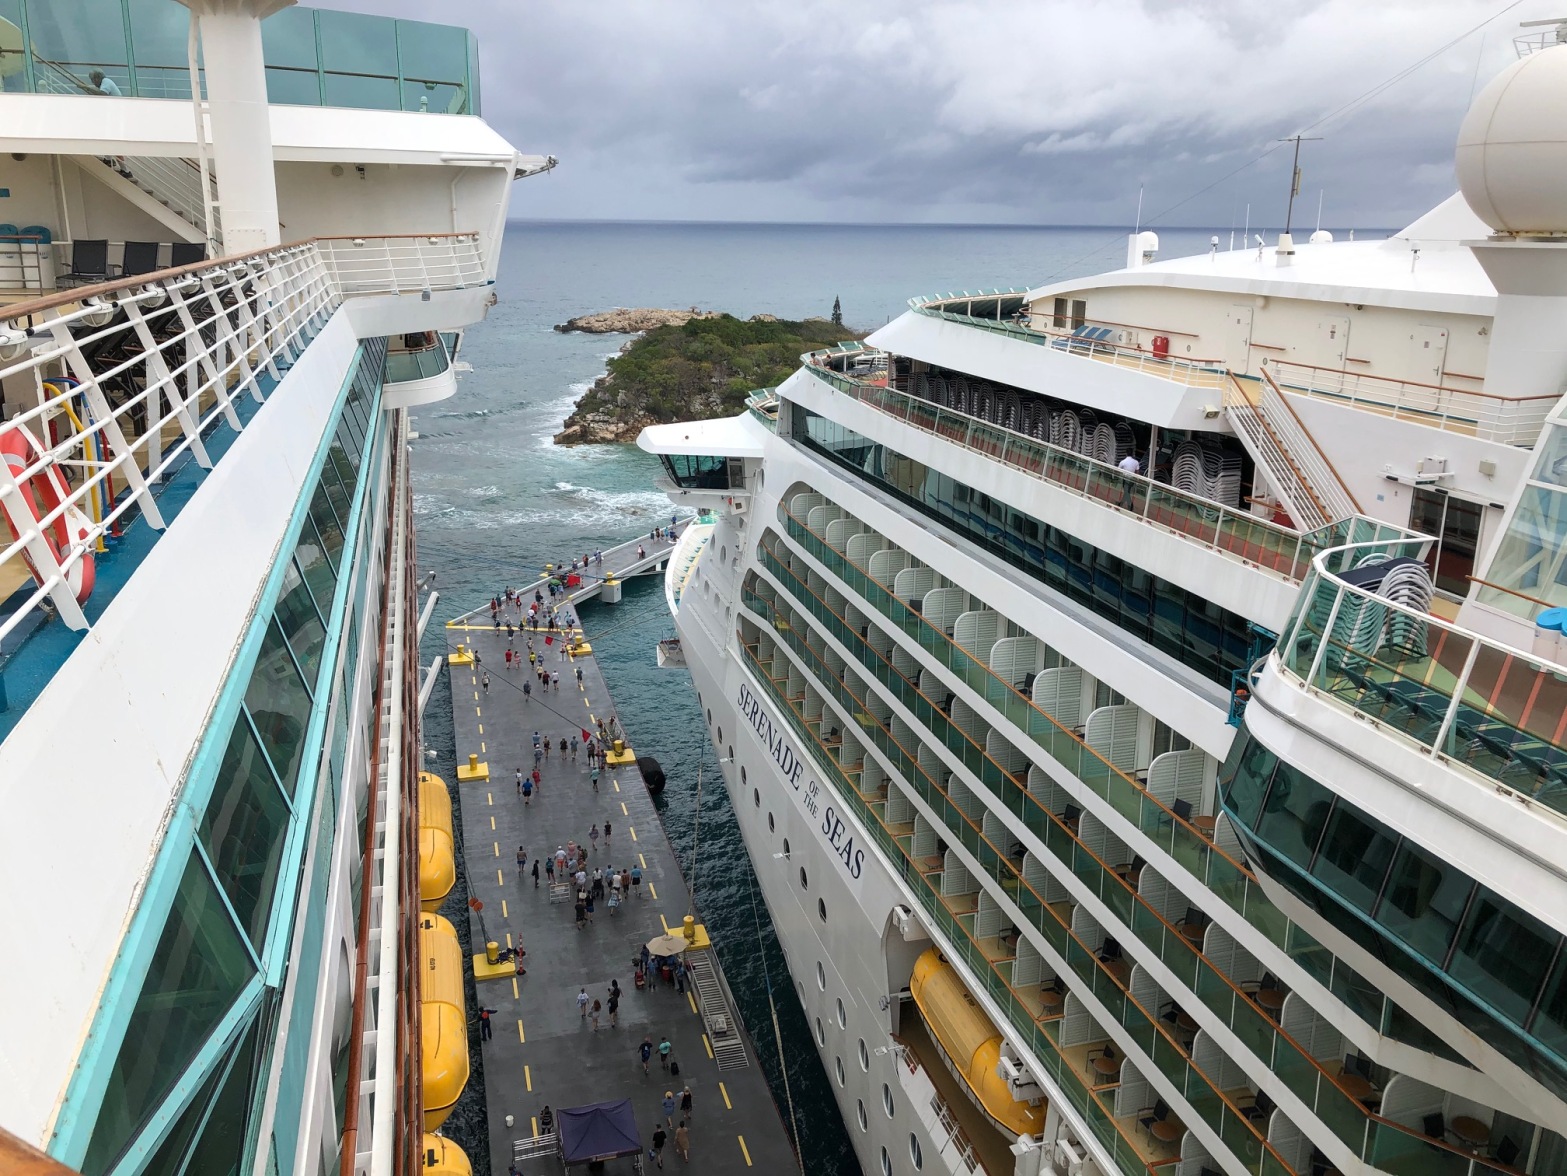 A Great Tip For Your Next Cruise: Join A Facebook Group